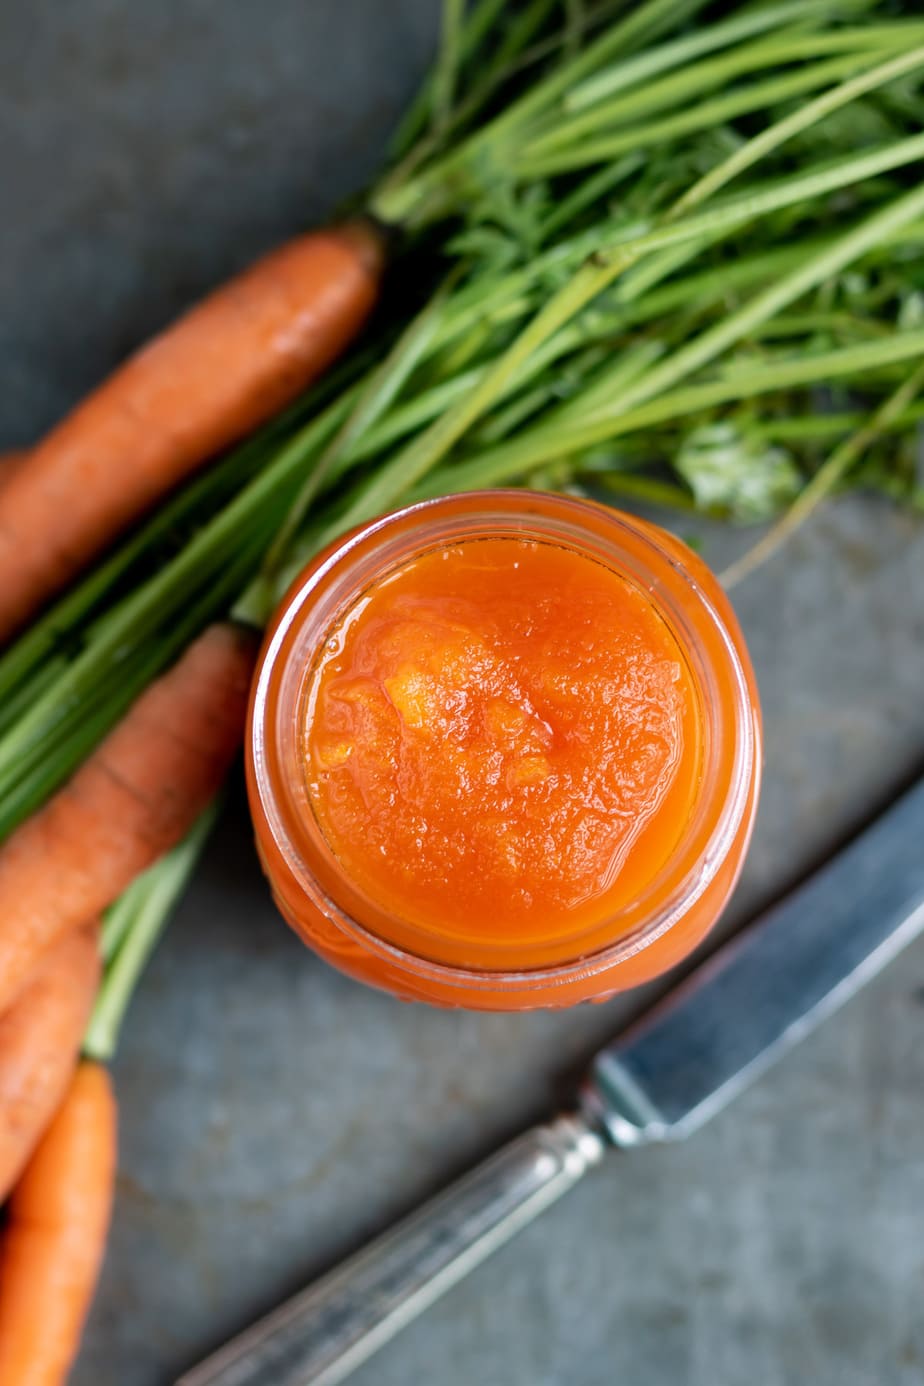 Looking down into a jar of carrot jam, next to a bunch of carrots and a knife.